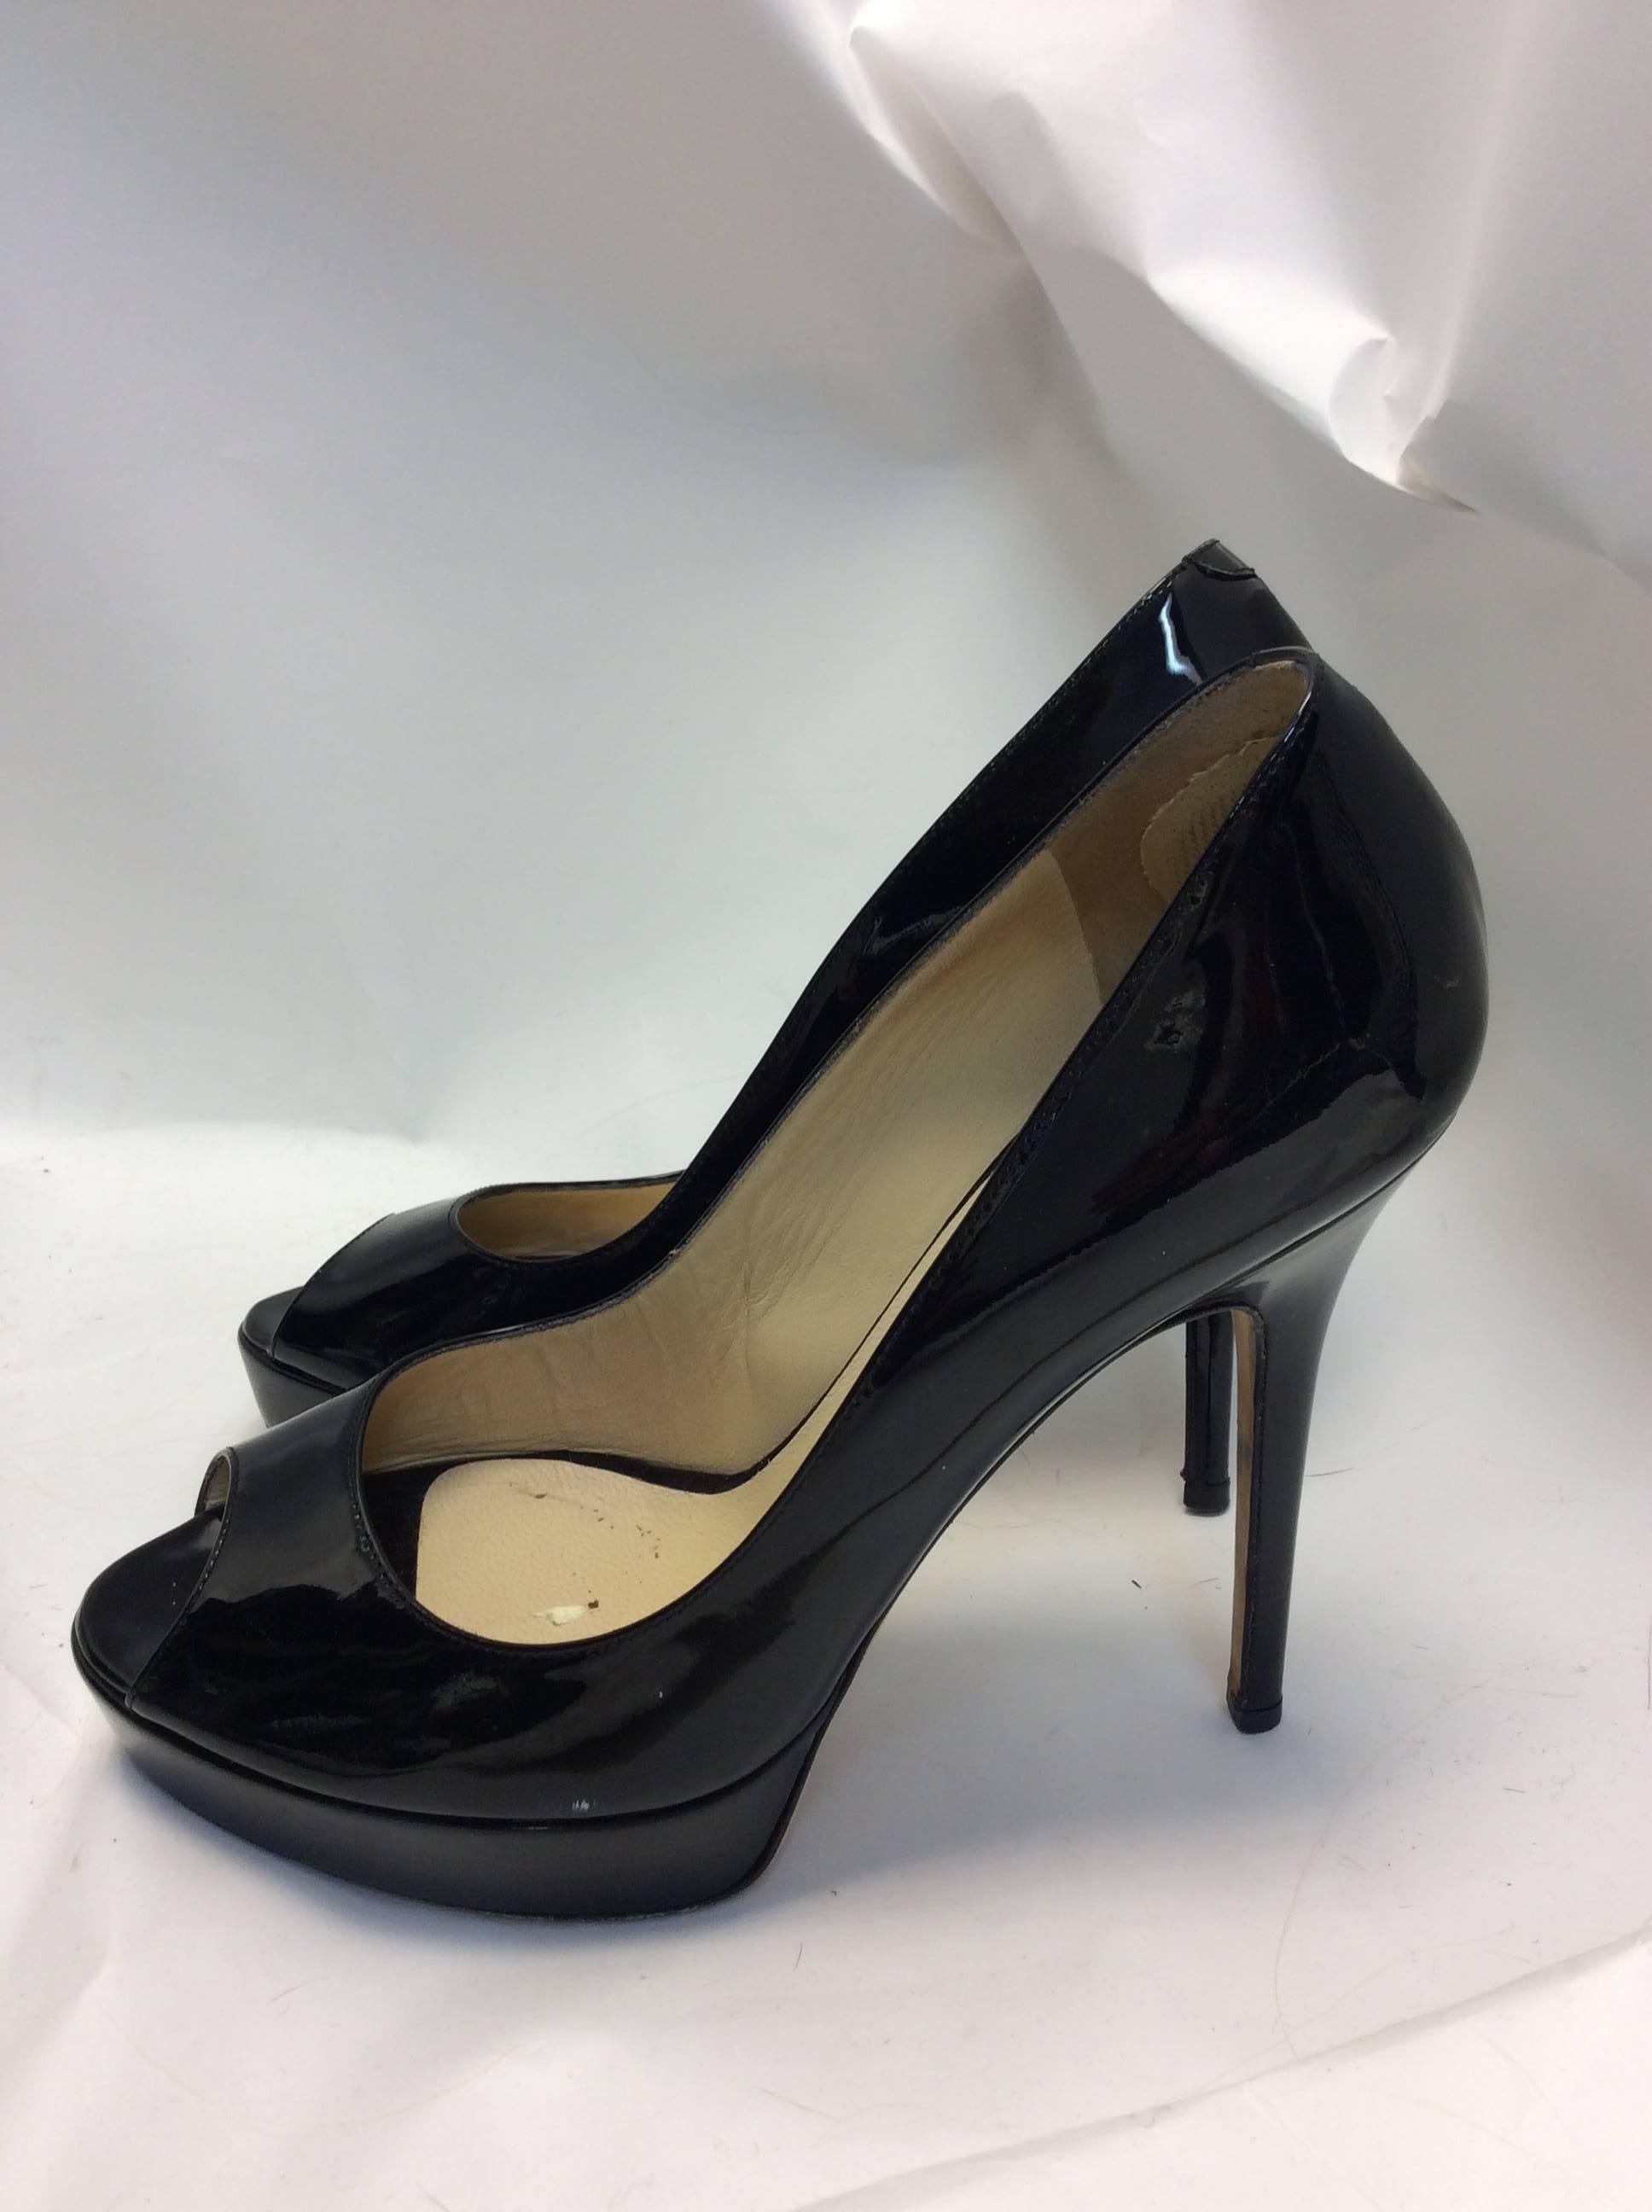 Jimmy Choo Black Patent Leather Platform Peep Toe Pumps
5 inch heel, 1 inch platform
$499
Size 39.5
Made in Italy